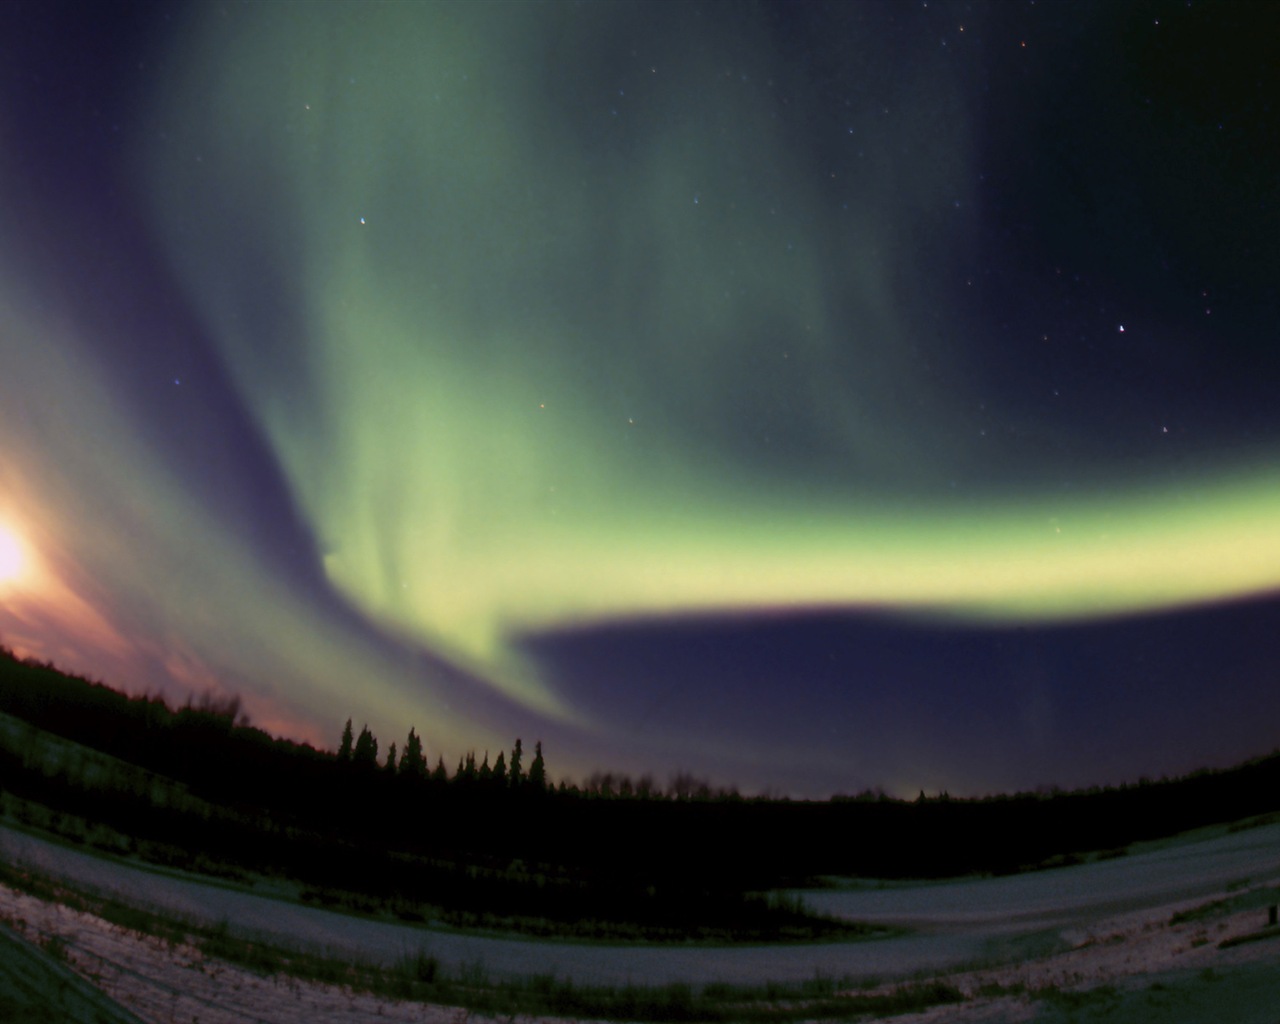 Natural wonders of the Northern Lights HD Wallpaper (2) #11 - 1280x1024